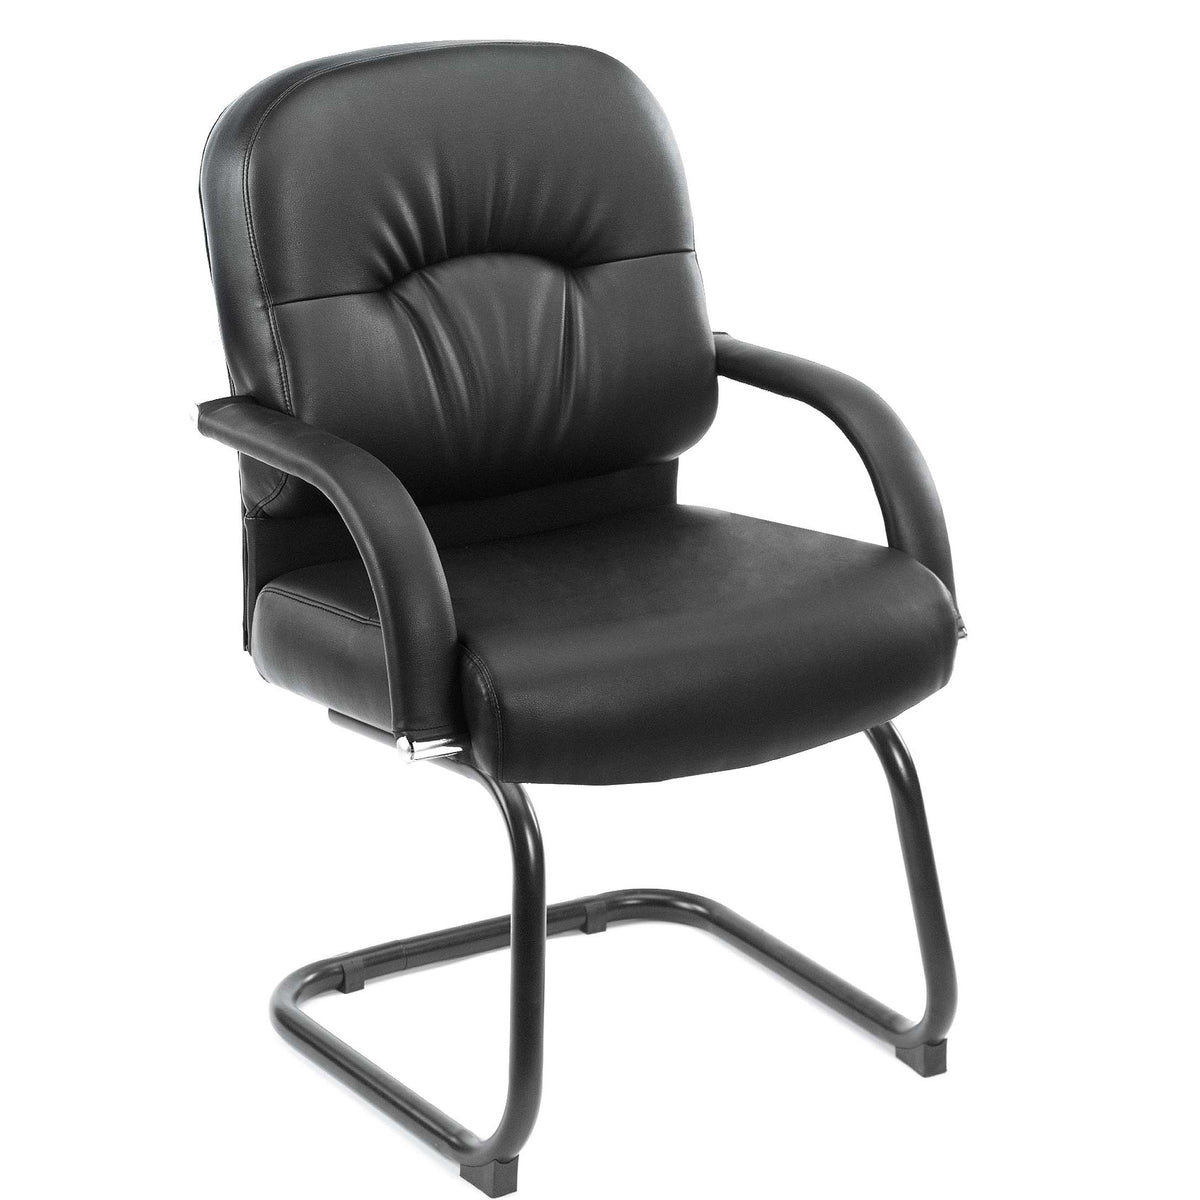 Mid Back CaressoftPlus Guest Chair In Black, B7409